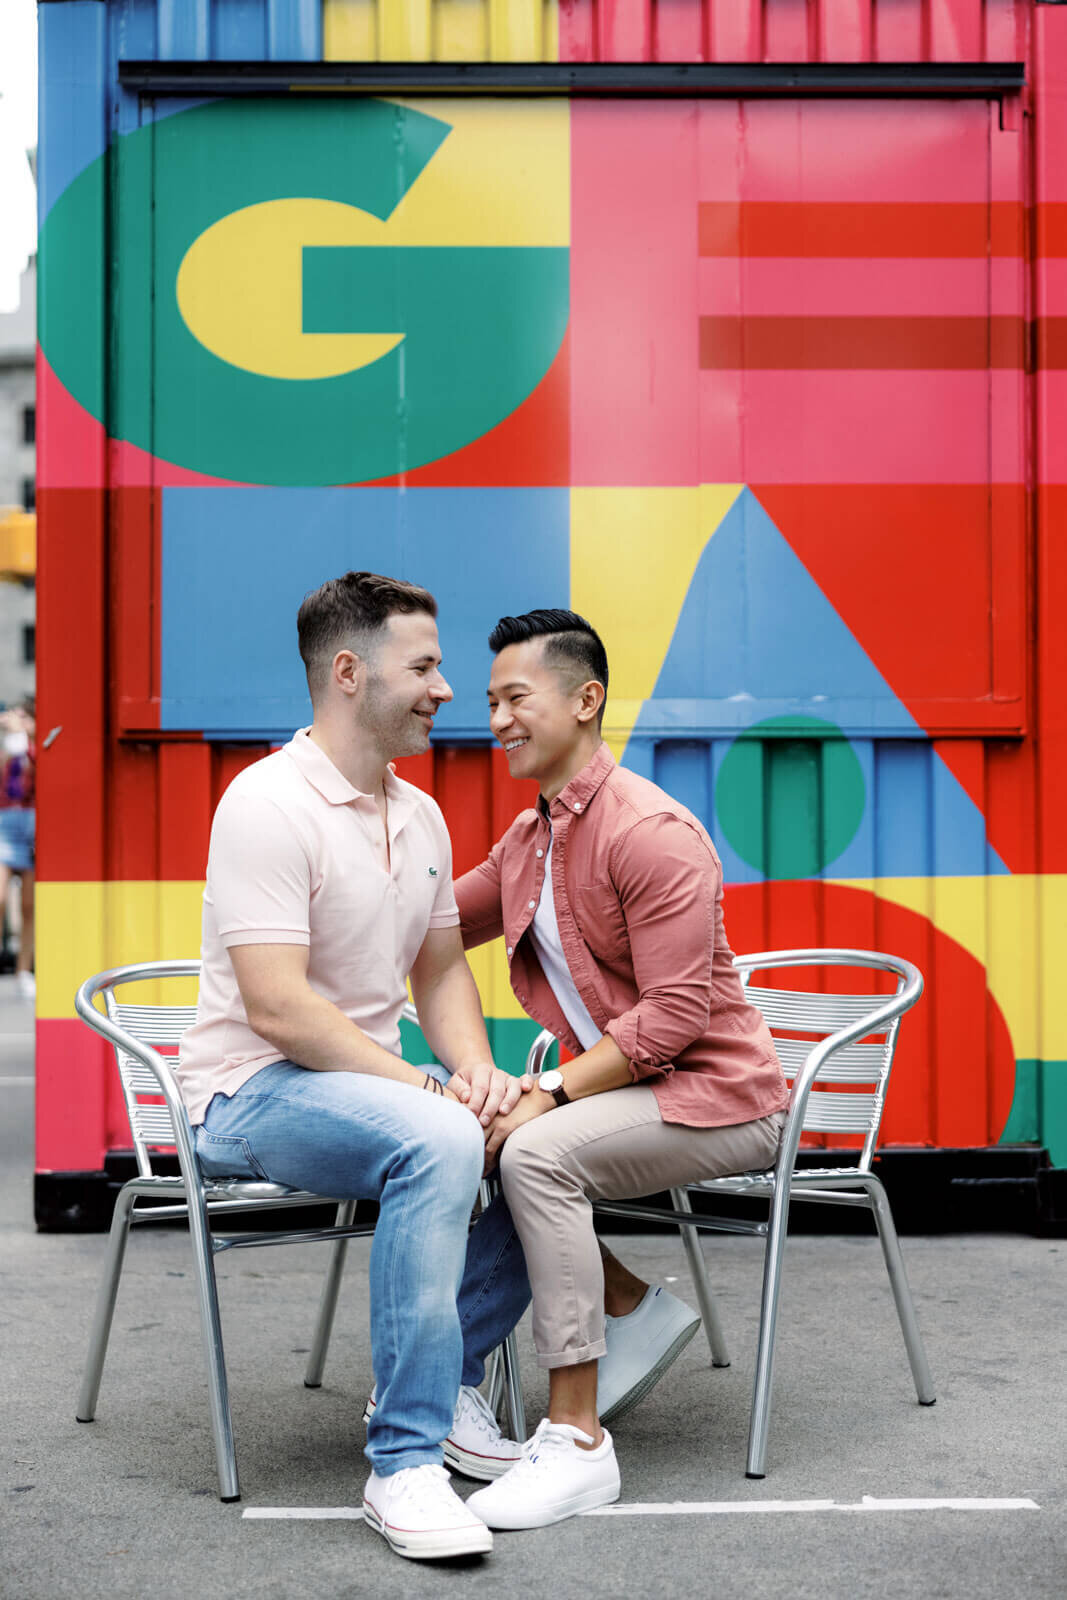 The engaged couple is happily sitting with a colorful wall in the background in West Village, NYC. Image by Jenny Fu Studio.